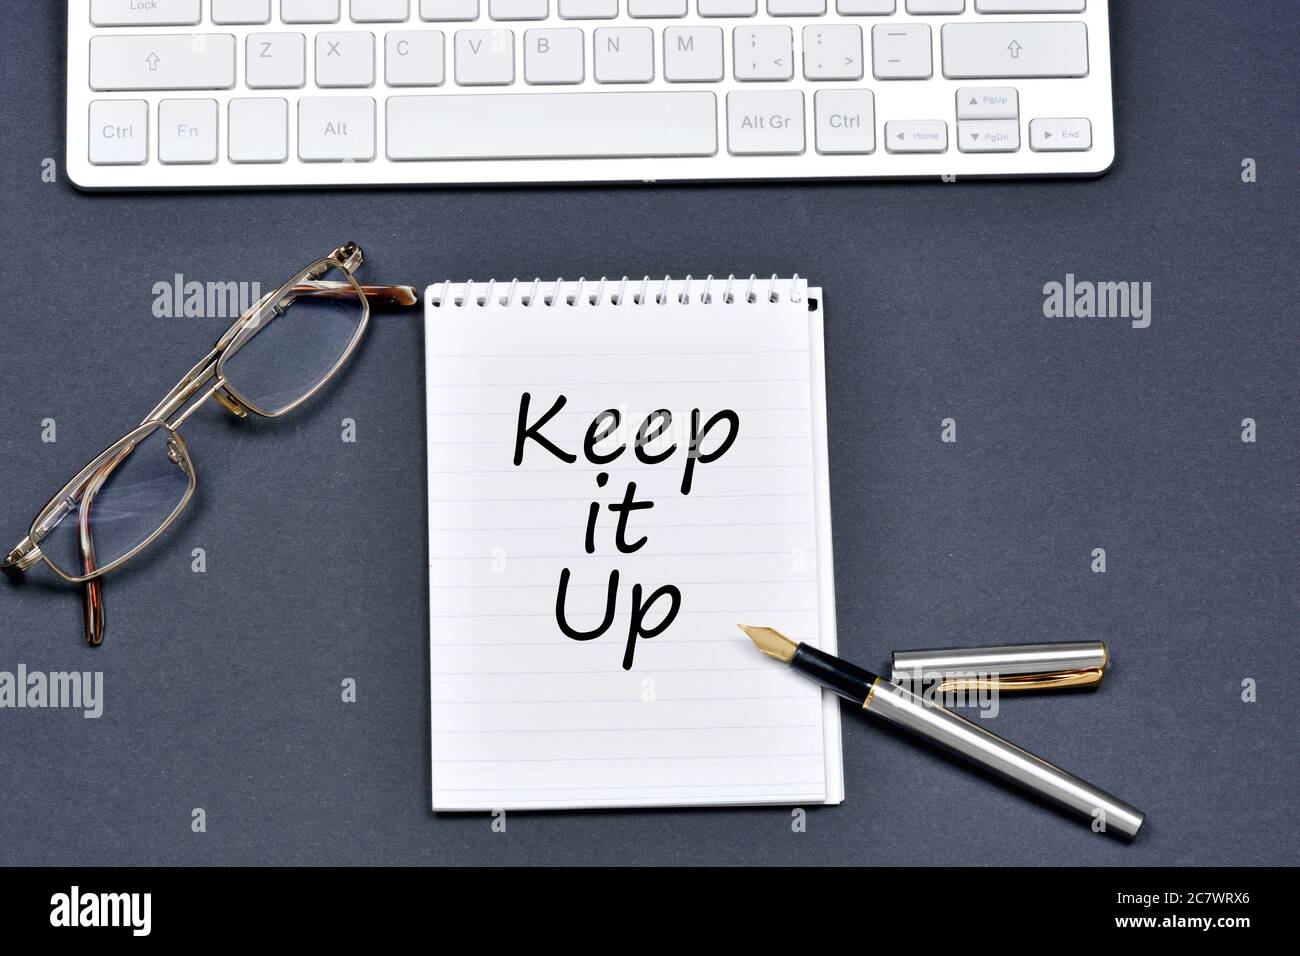 Keep it up text on notebook on a black background Stock Photo